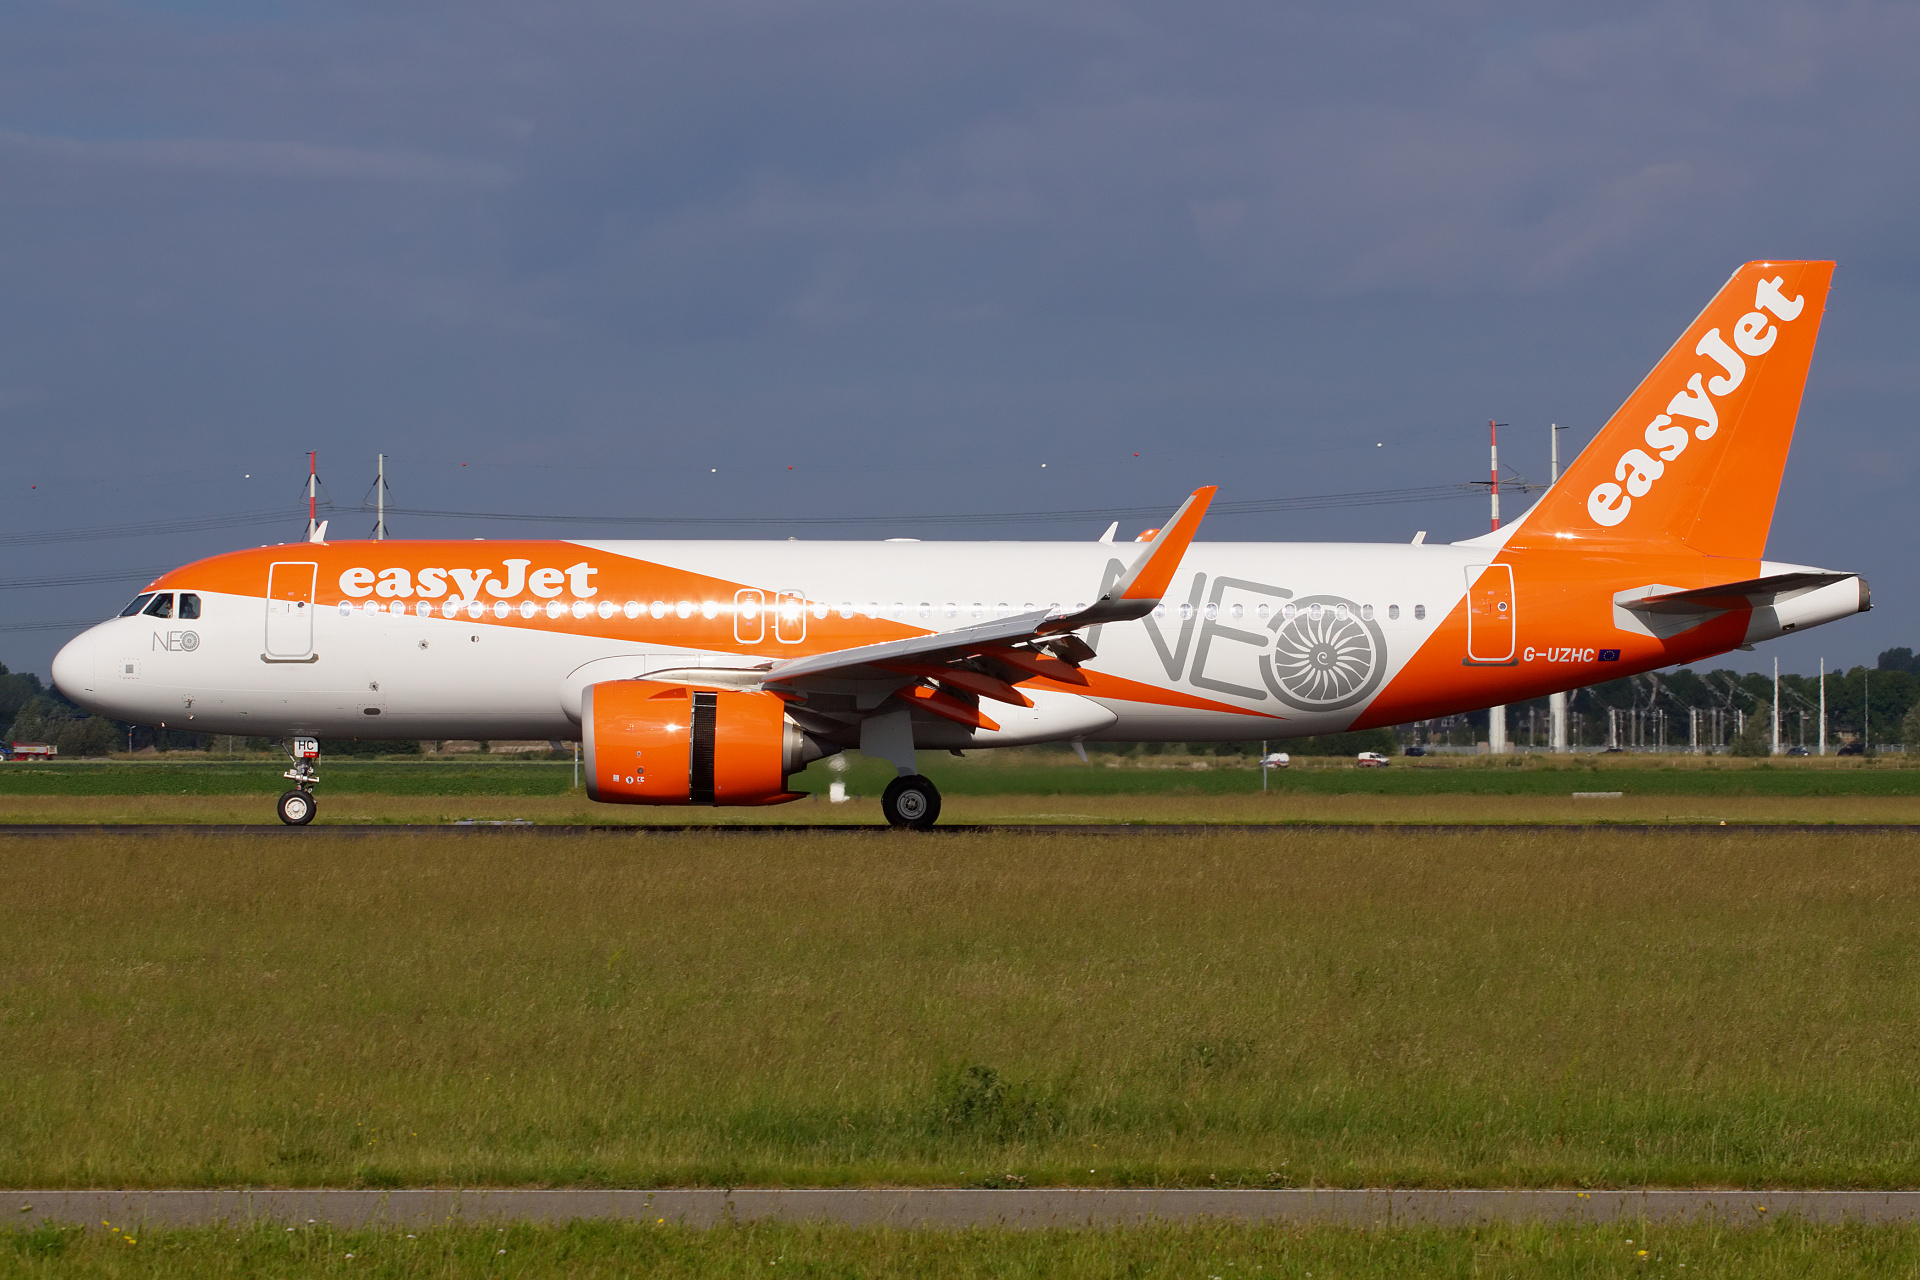 G-UZHC, EasyJet (NEO livery) (Aircraft » Schiphol Spotting » Airbus A320neo)